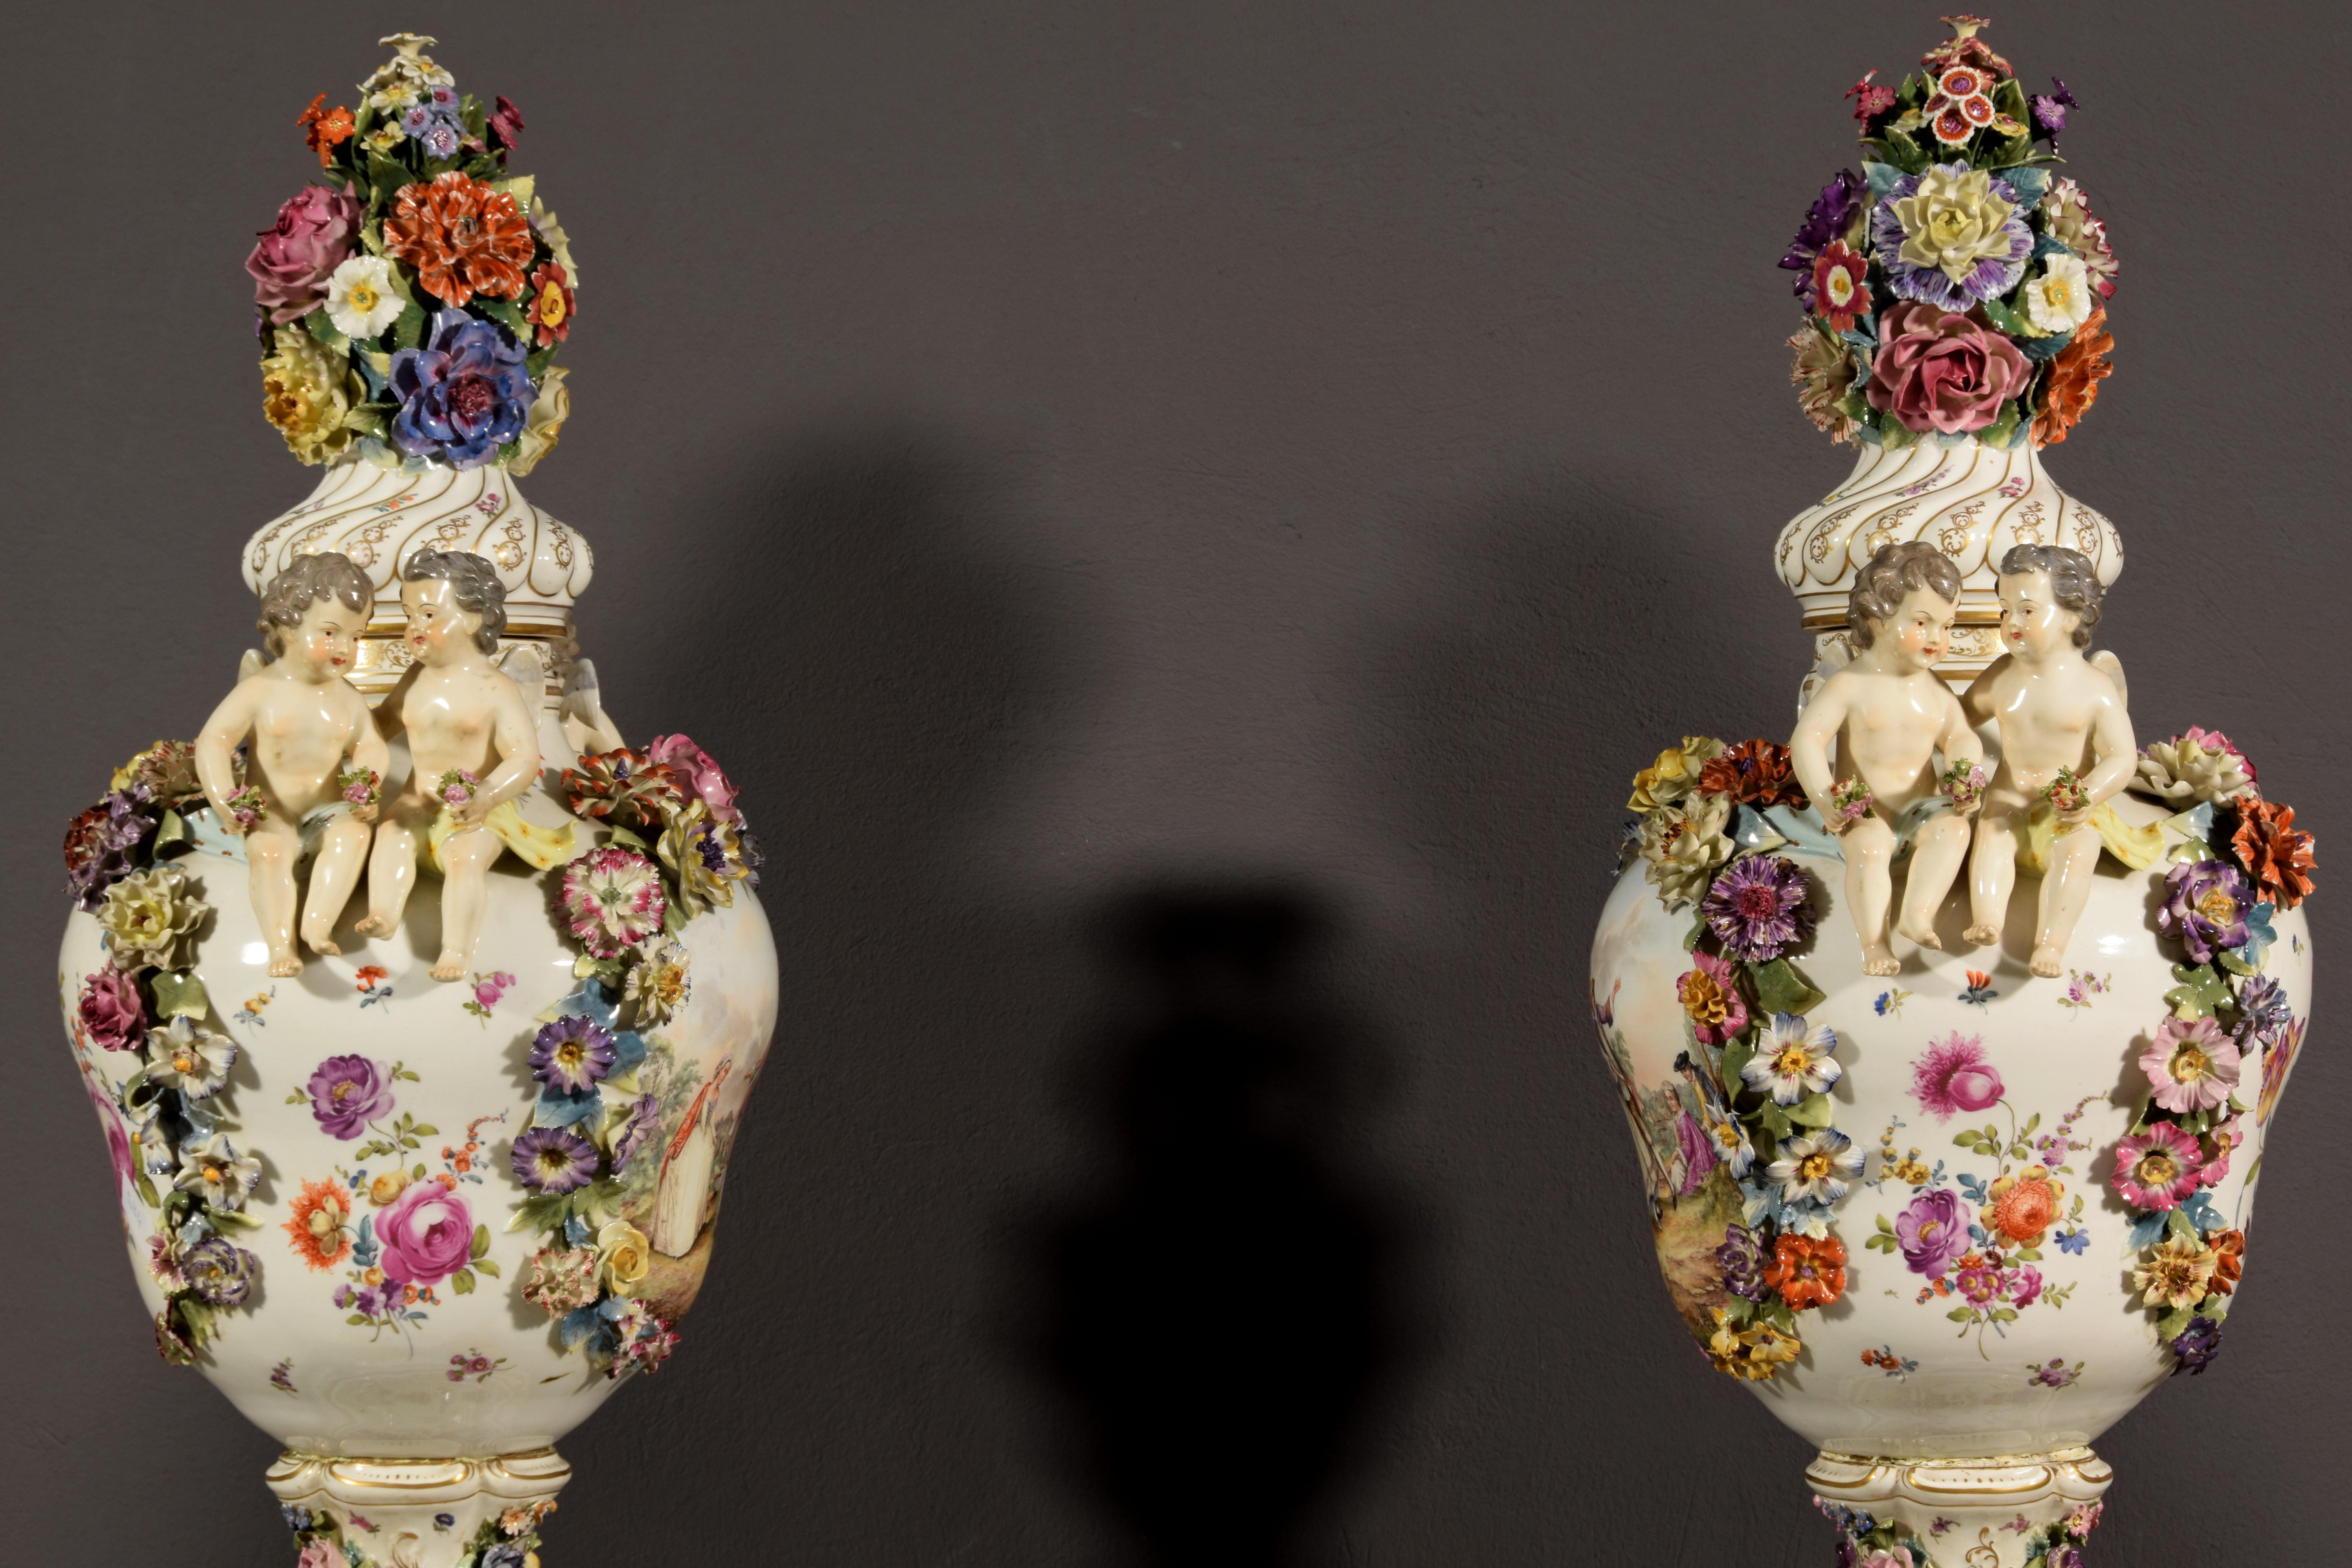 19th Century Pair of German Polychrome Porcelain Vases For Sale 10